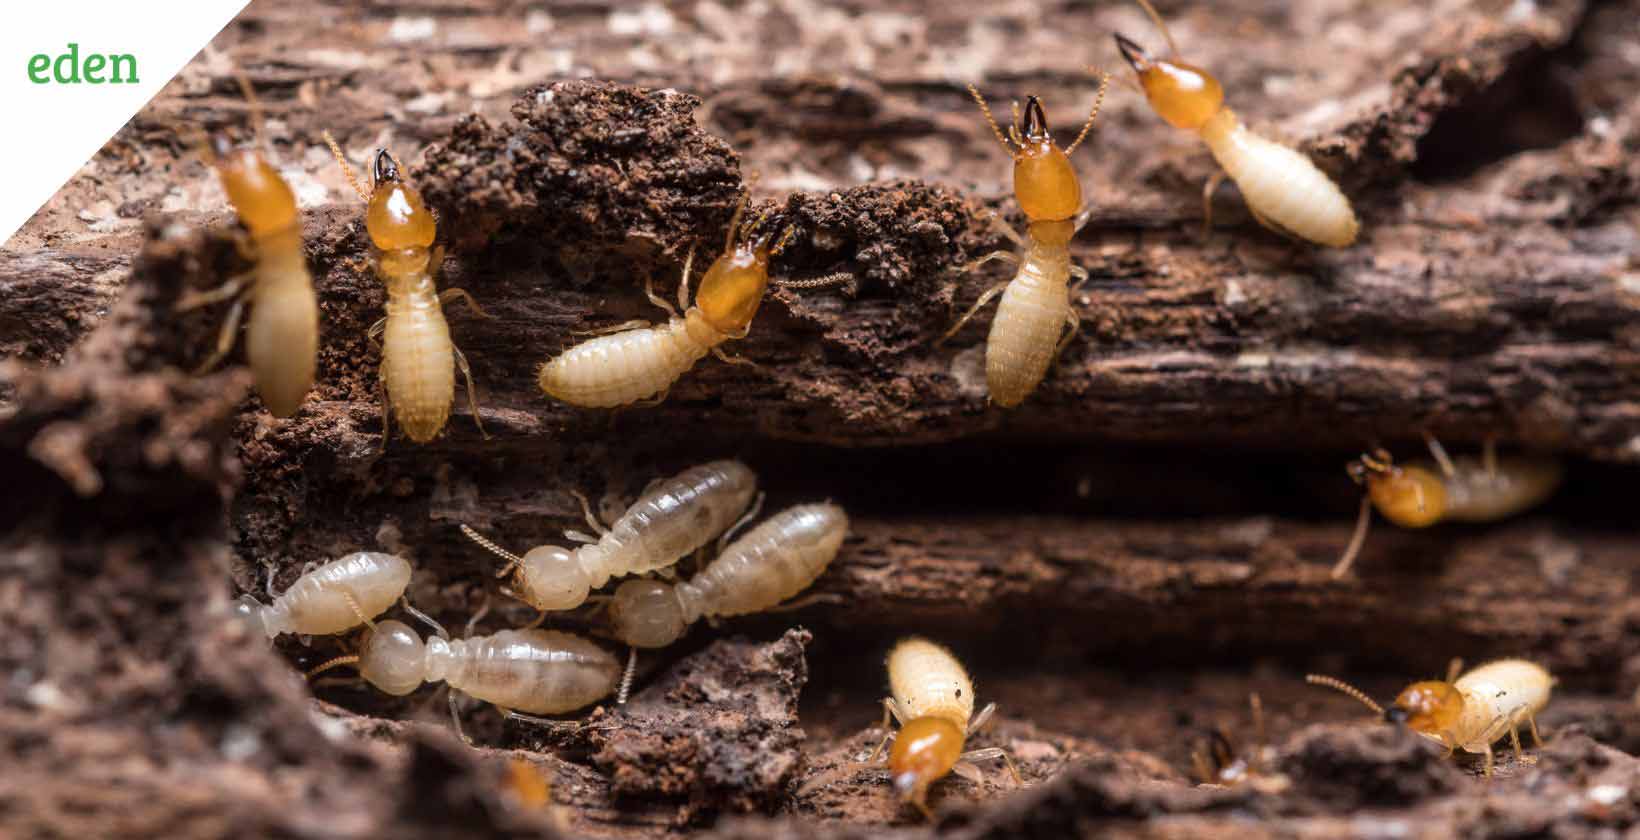 Getting Rid of Termites in your Yard